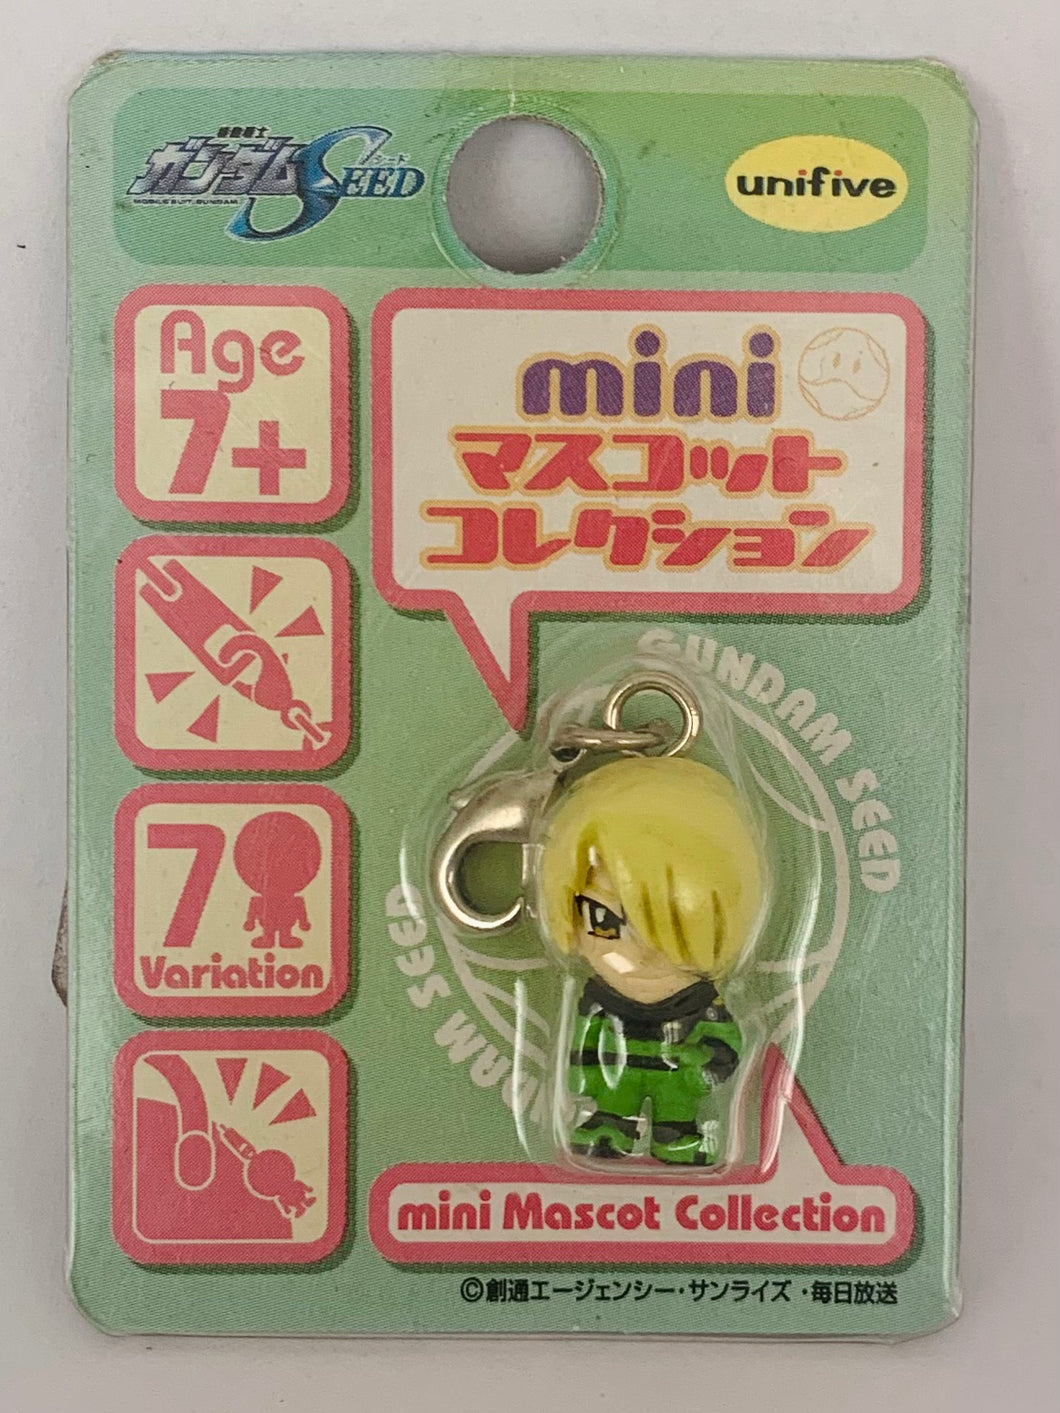 Mobile Suit Gundam Seed - Miguel Aiman - Mini Mascot Collection D